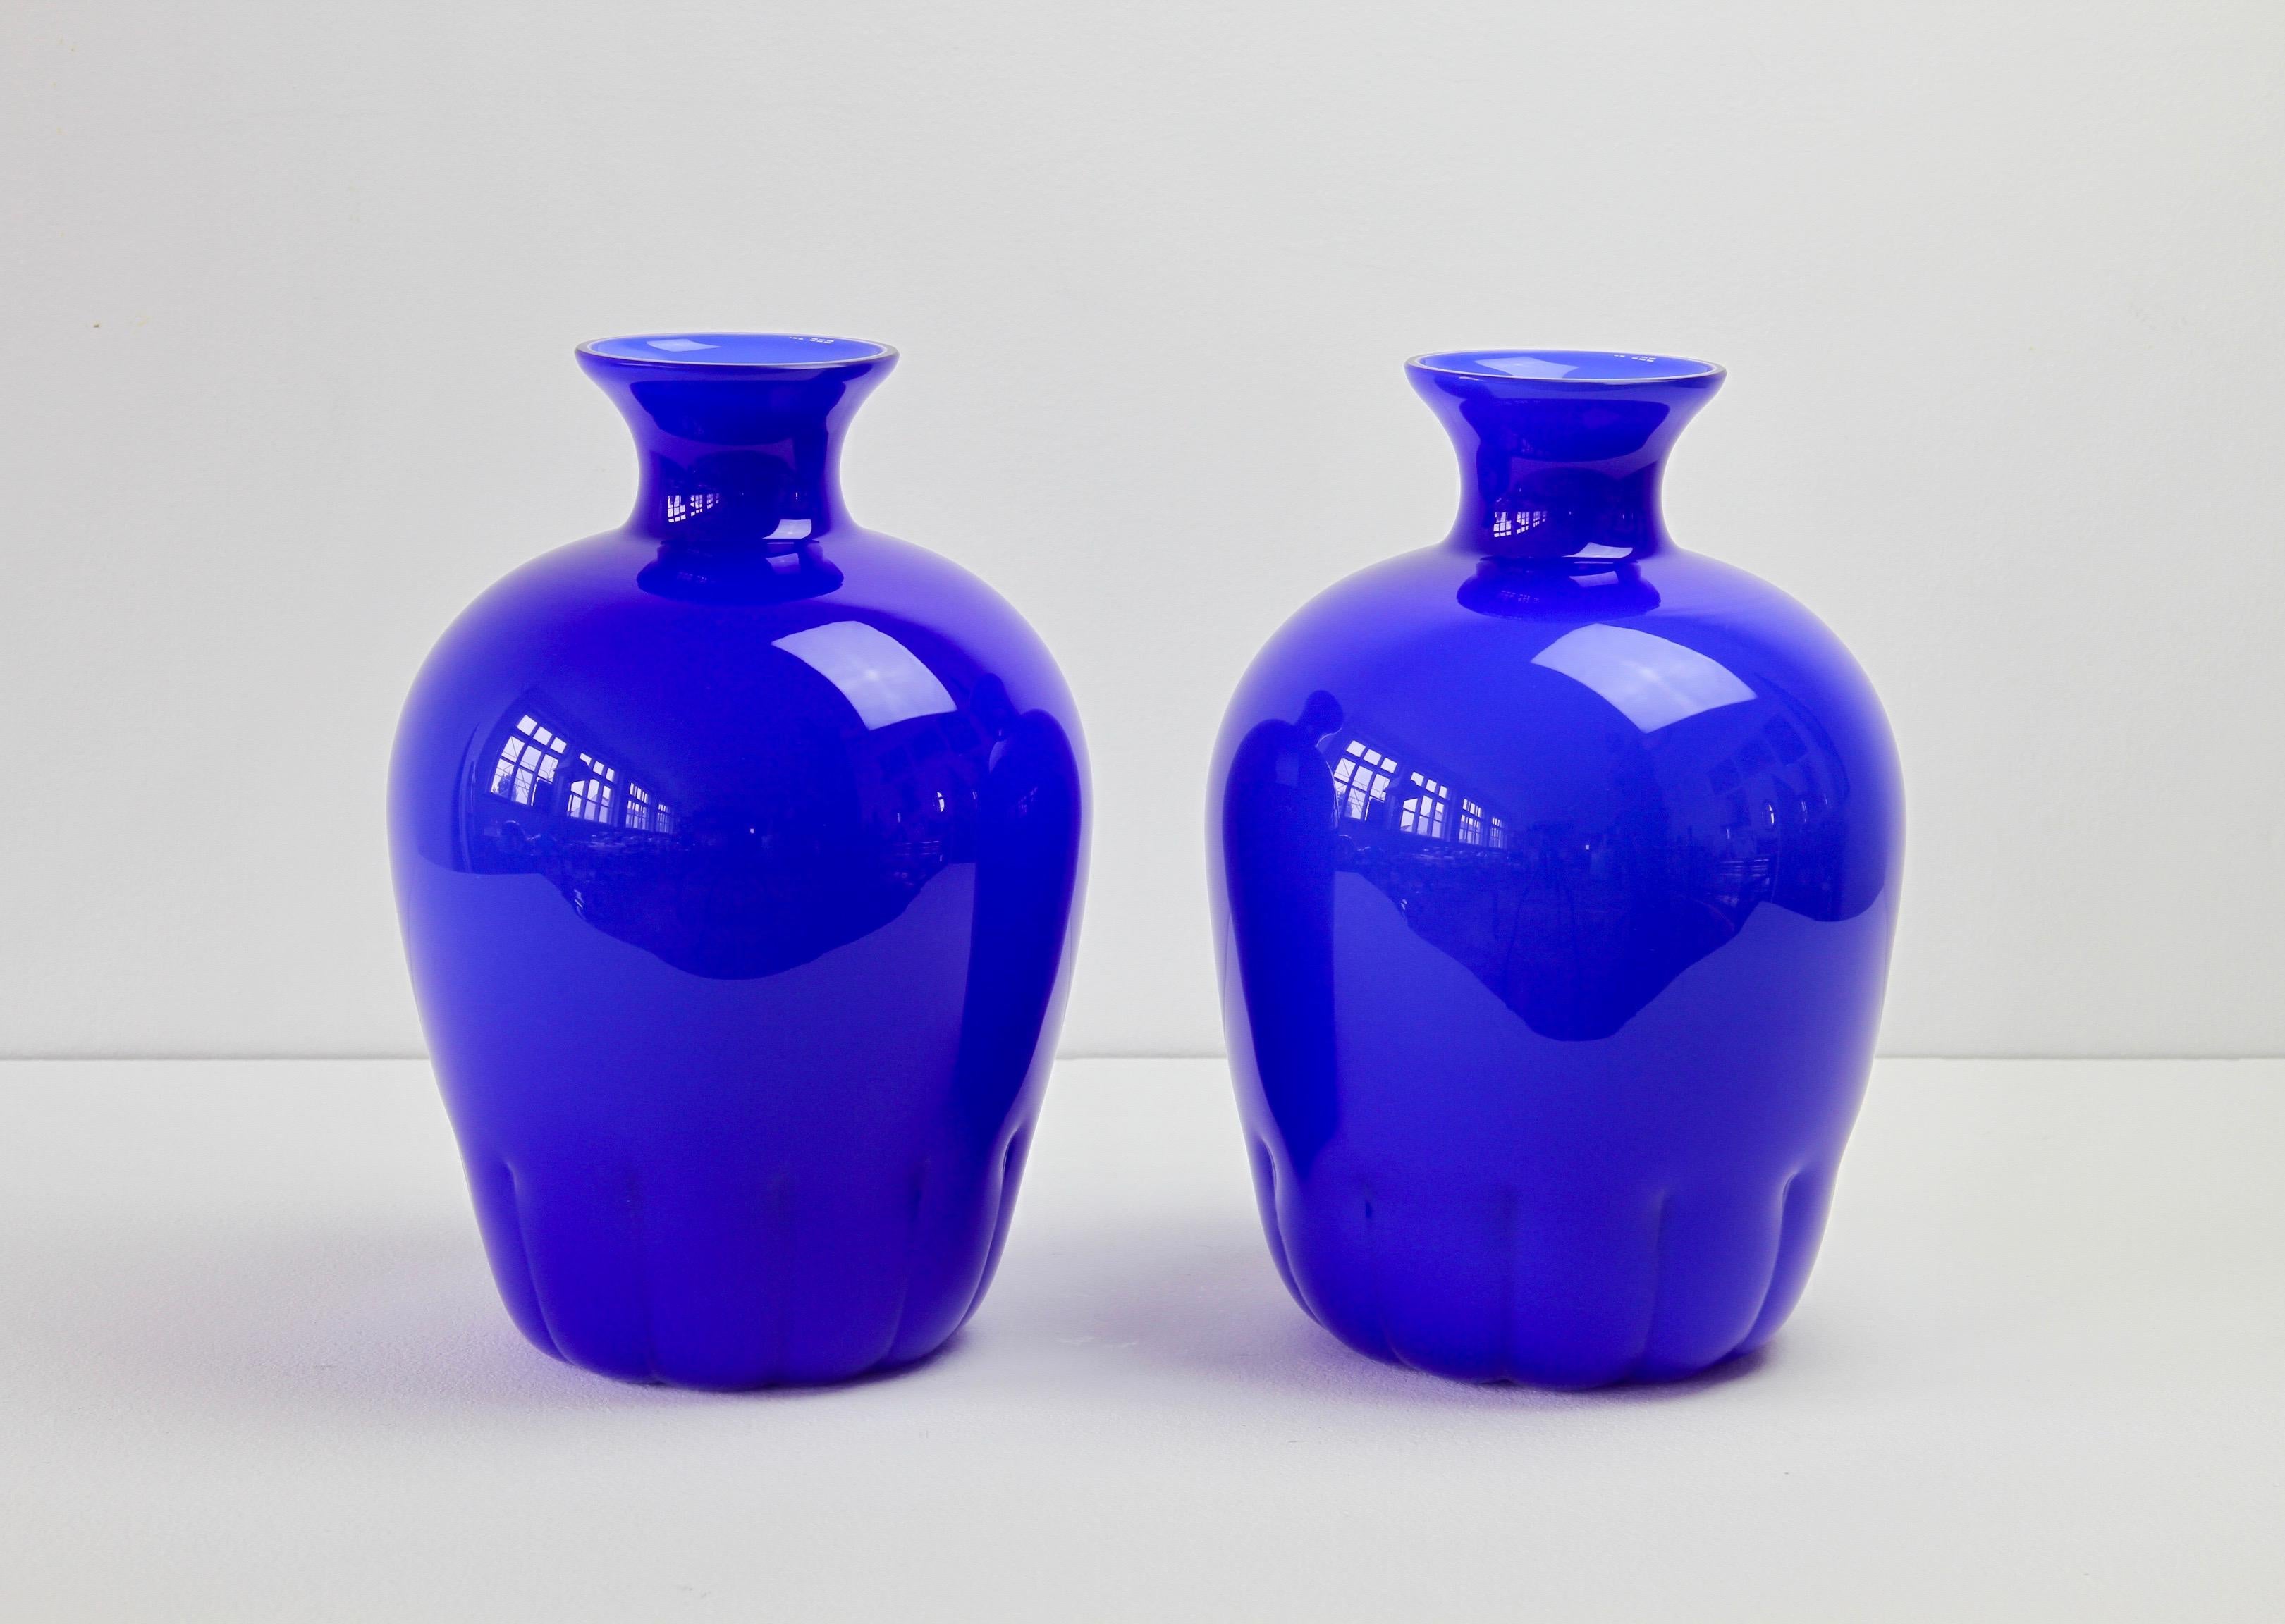 Colorful (colorful) pair of midcentury cobalt blue vases by Cenedese Vetri of Murano, Italy, circa 1970s-1990s. Particularly striking is the narrow necked round form with rippled bases, very similar to Napoleone Martinuzzi bowls for Venini in the